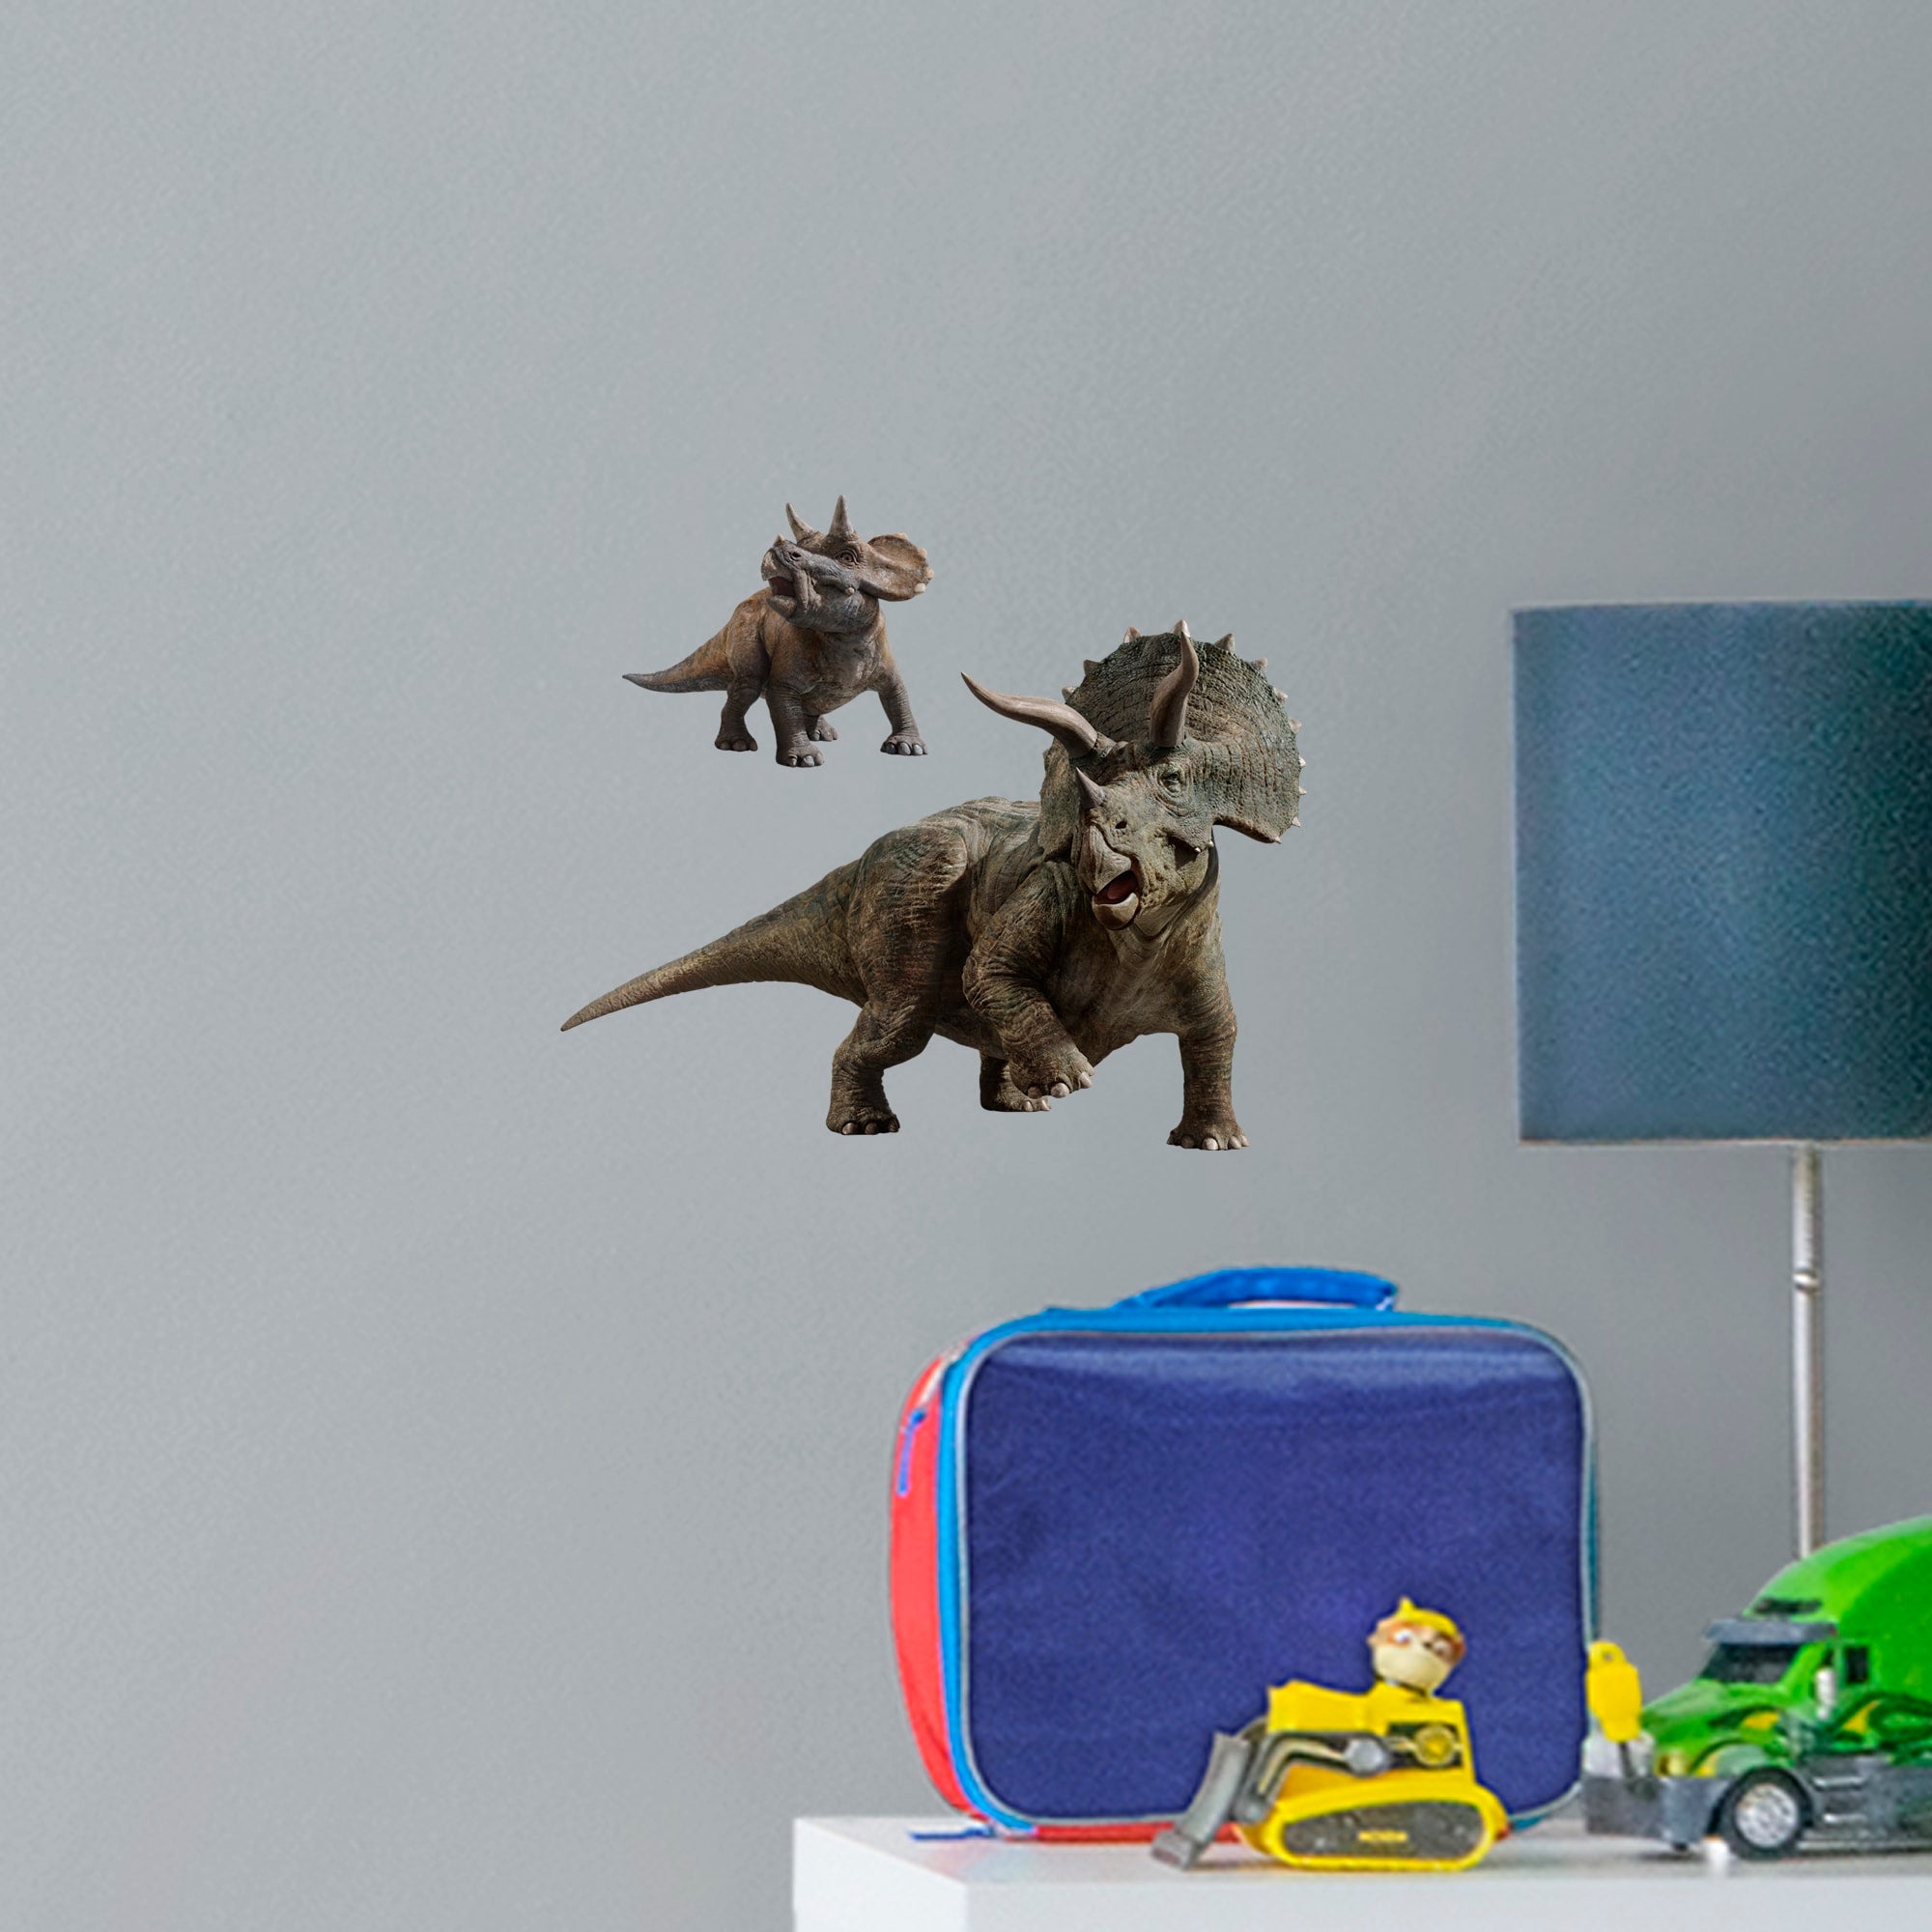 Triceratops - Jurassic World: Fallen Kingdom - Officially Licensed Removable Wall Decal Large by Fathead | Vinyl